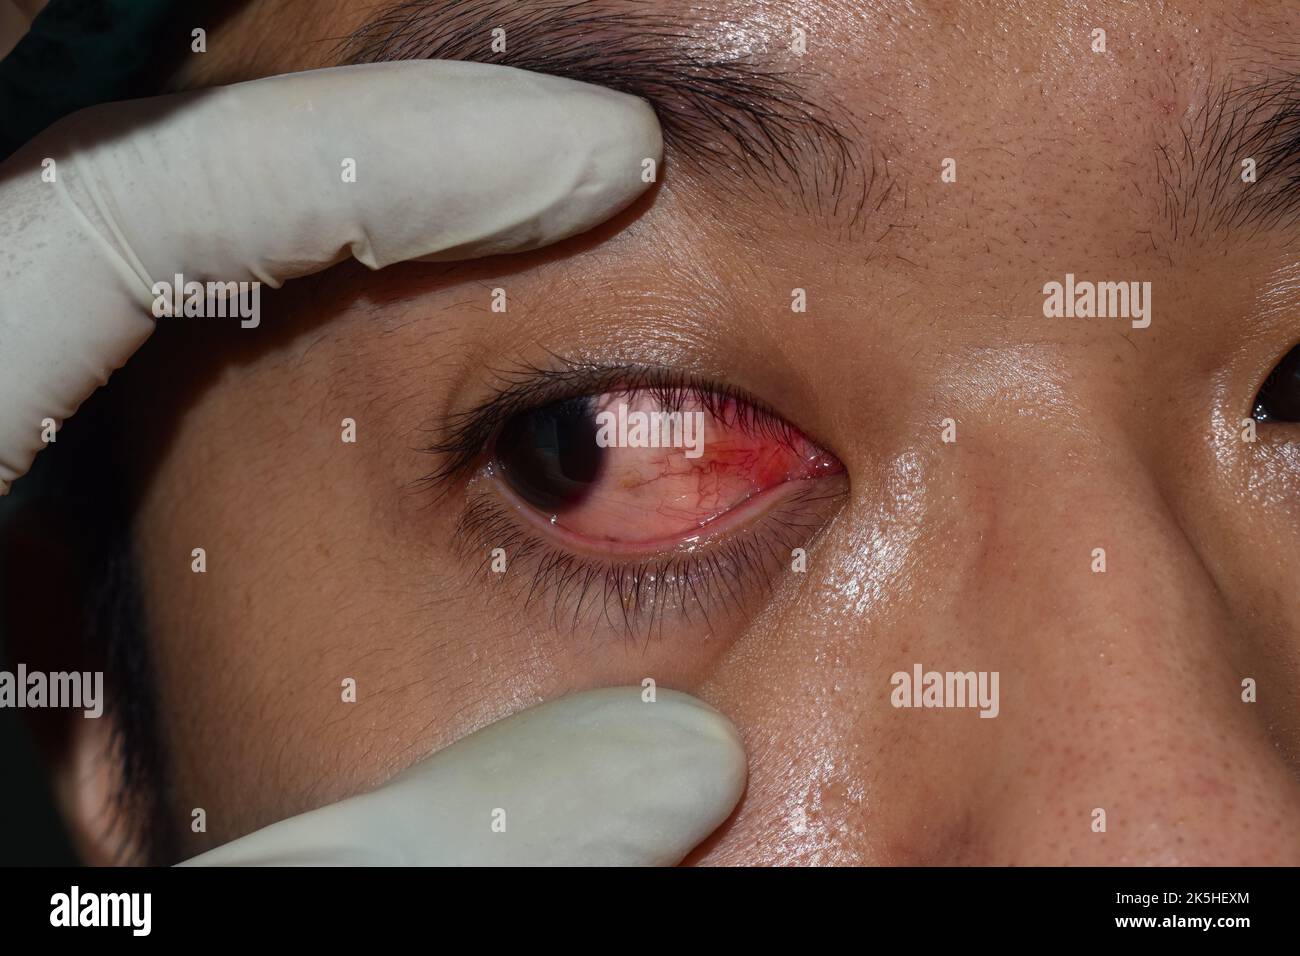 Corneal infection or ulcer called keratitis in Asian young man. Stock Photo